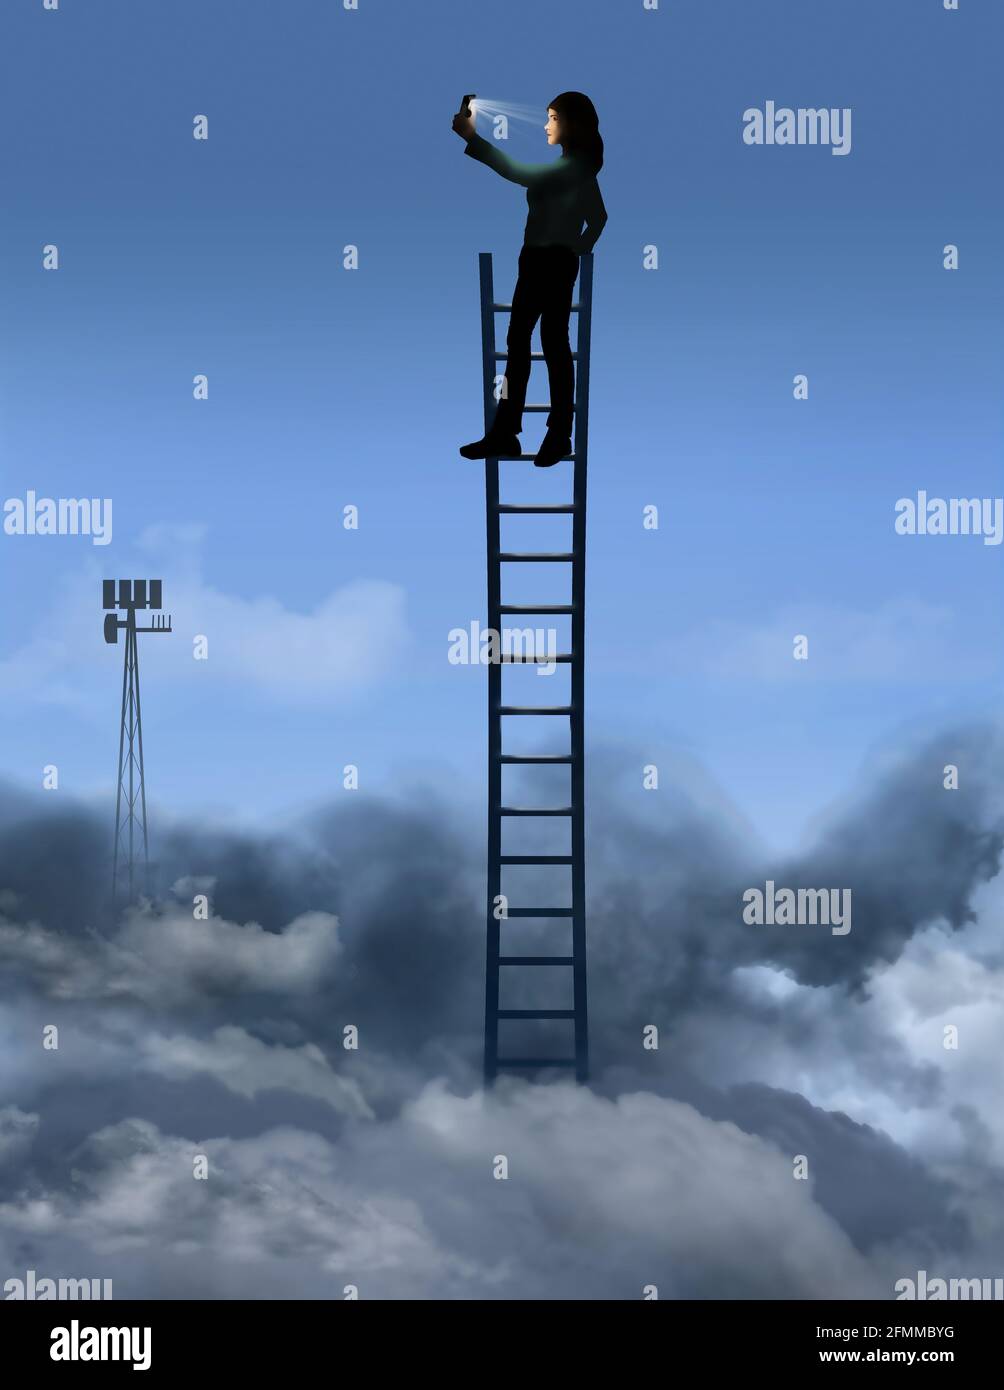 A woman looking for a cell phone signal is seen at the top of a ladder above the clouds searching for that signal. This is a 3-D ilustration. Stock Photo